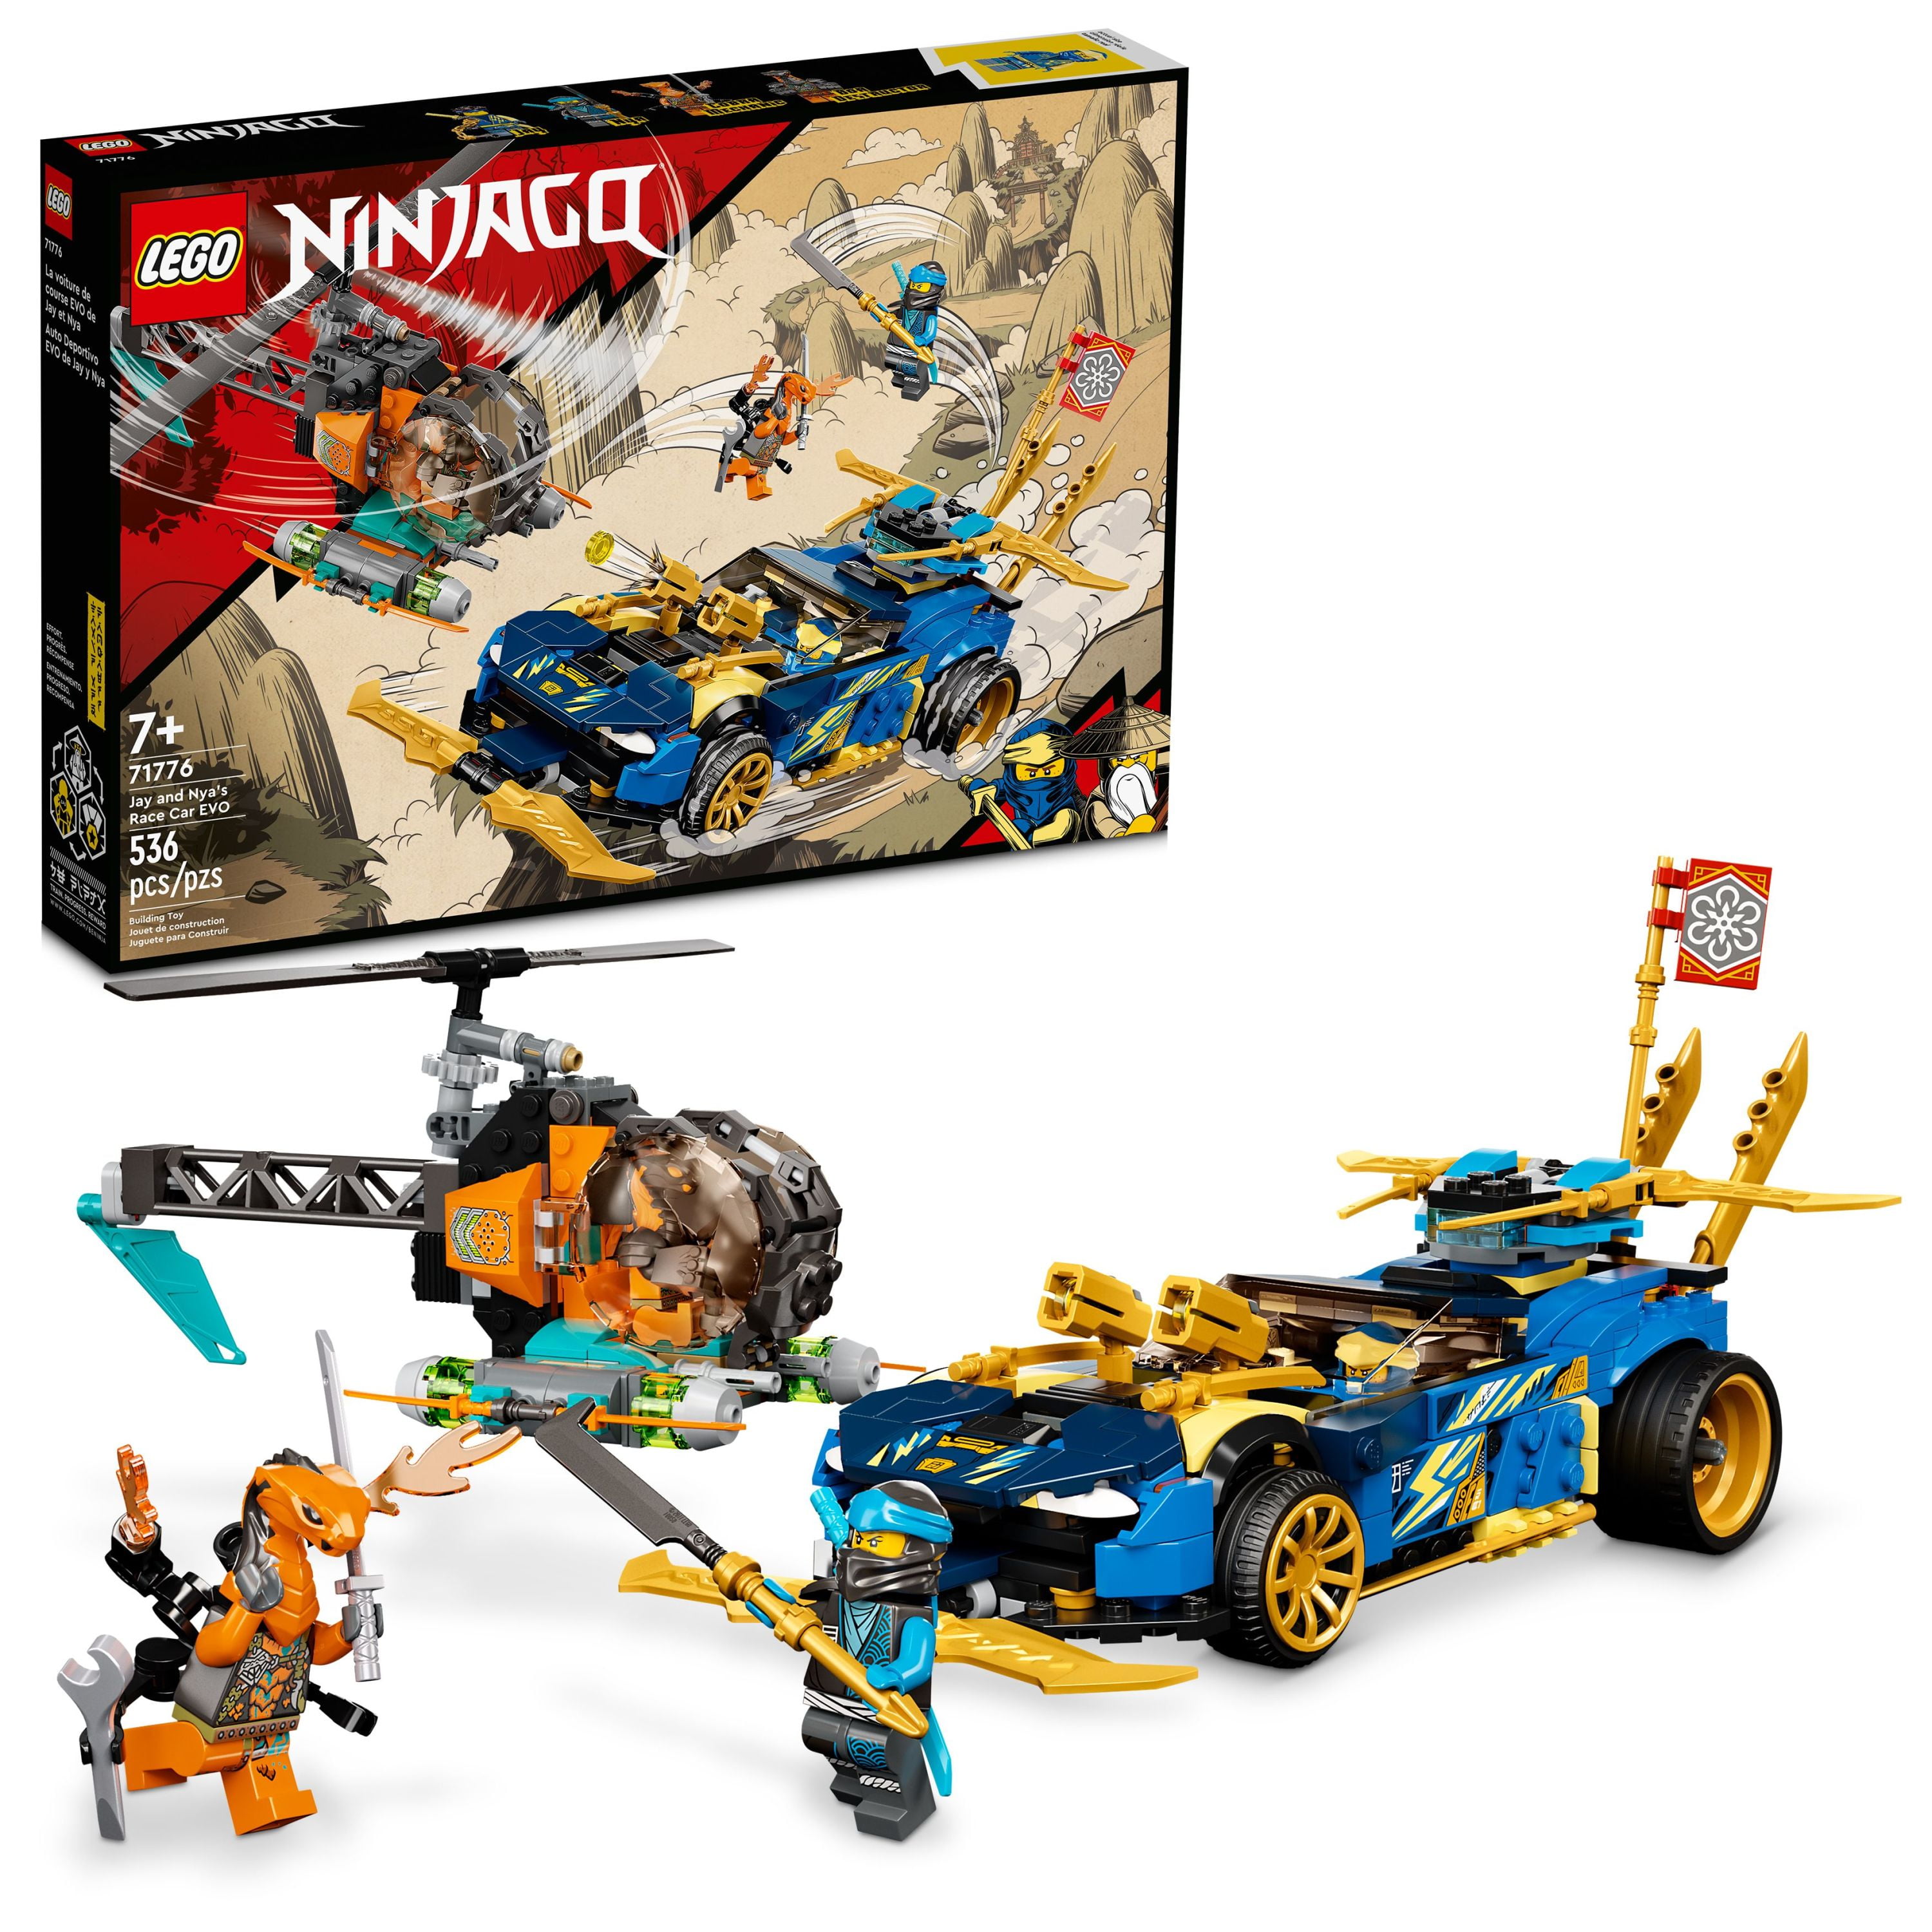 LEGO NINJAGO Jay and Nyas Race Car EVO 71776 Playset, Featuring a Helicopter Toy, NINJAGO Jay and Snake Figures; Creative Building Kit for Kids Aged 7+ (536 Pieces)